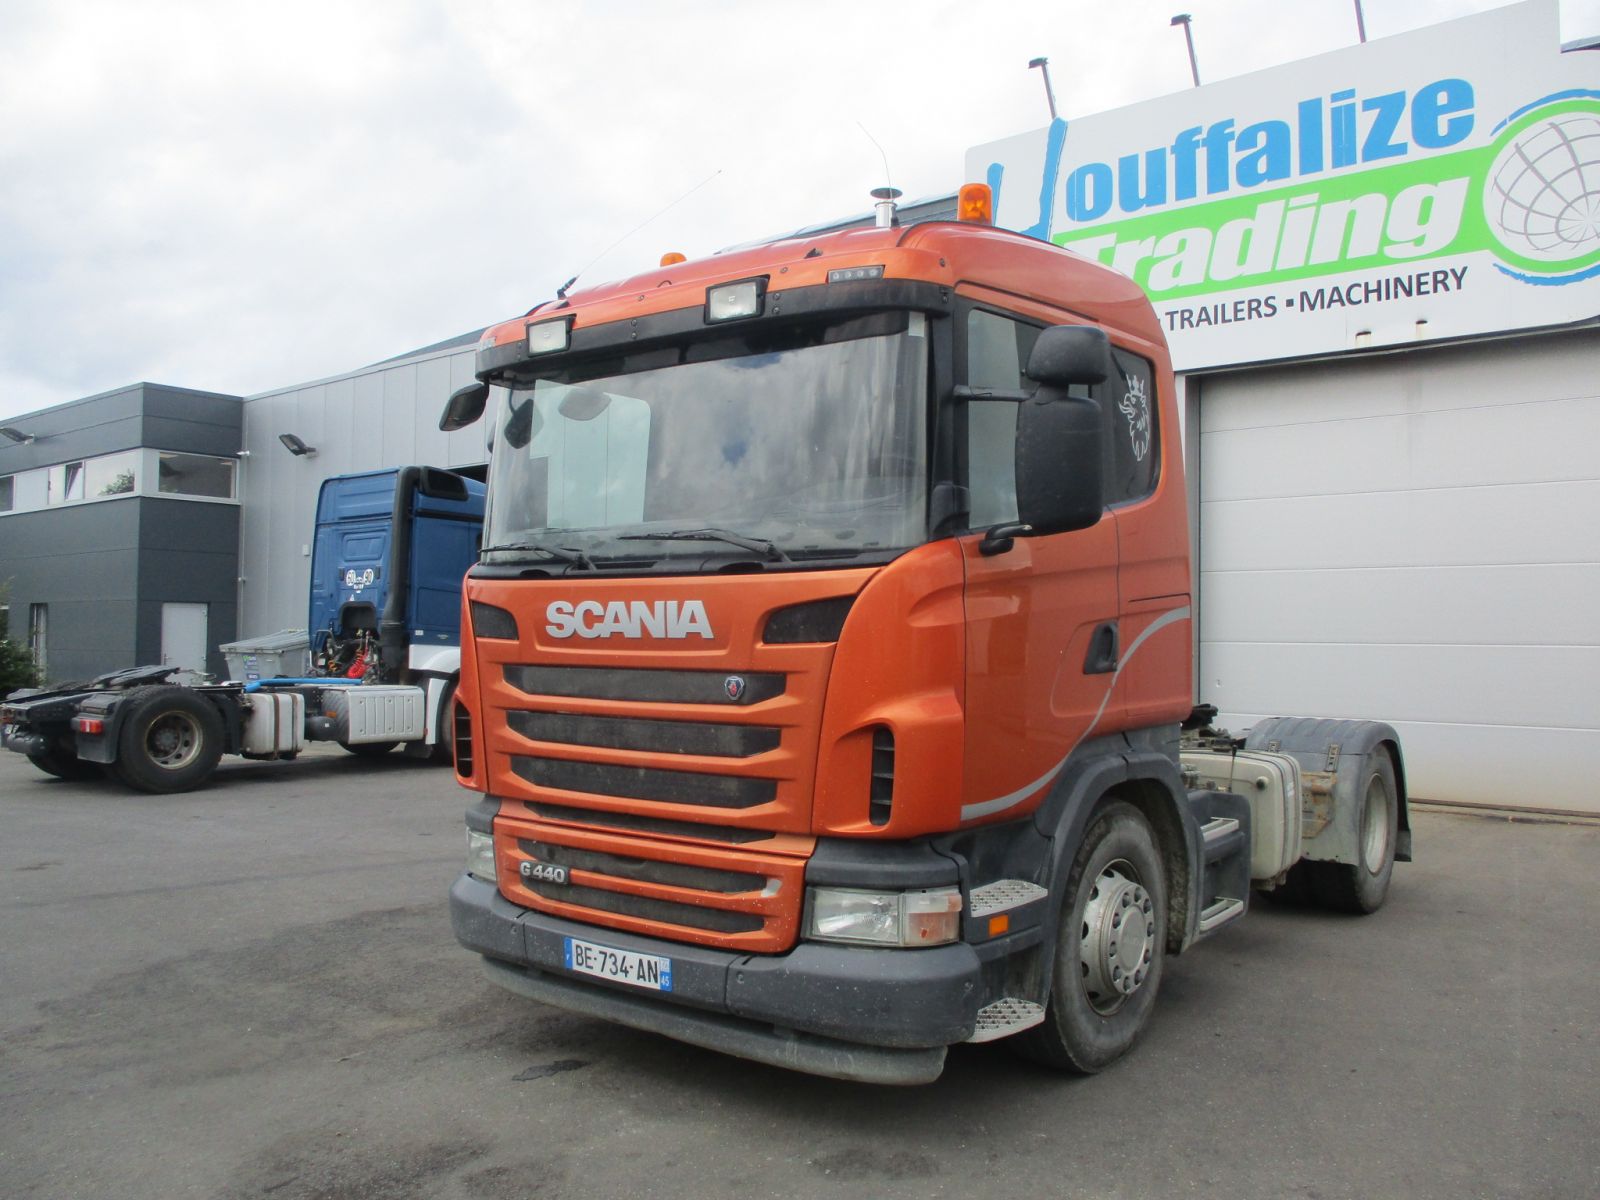 Vente occasion  Tracteur - SCANIA G440  TRACTEUR (Belgique - Europe) - Houffalize Trading s.a.